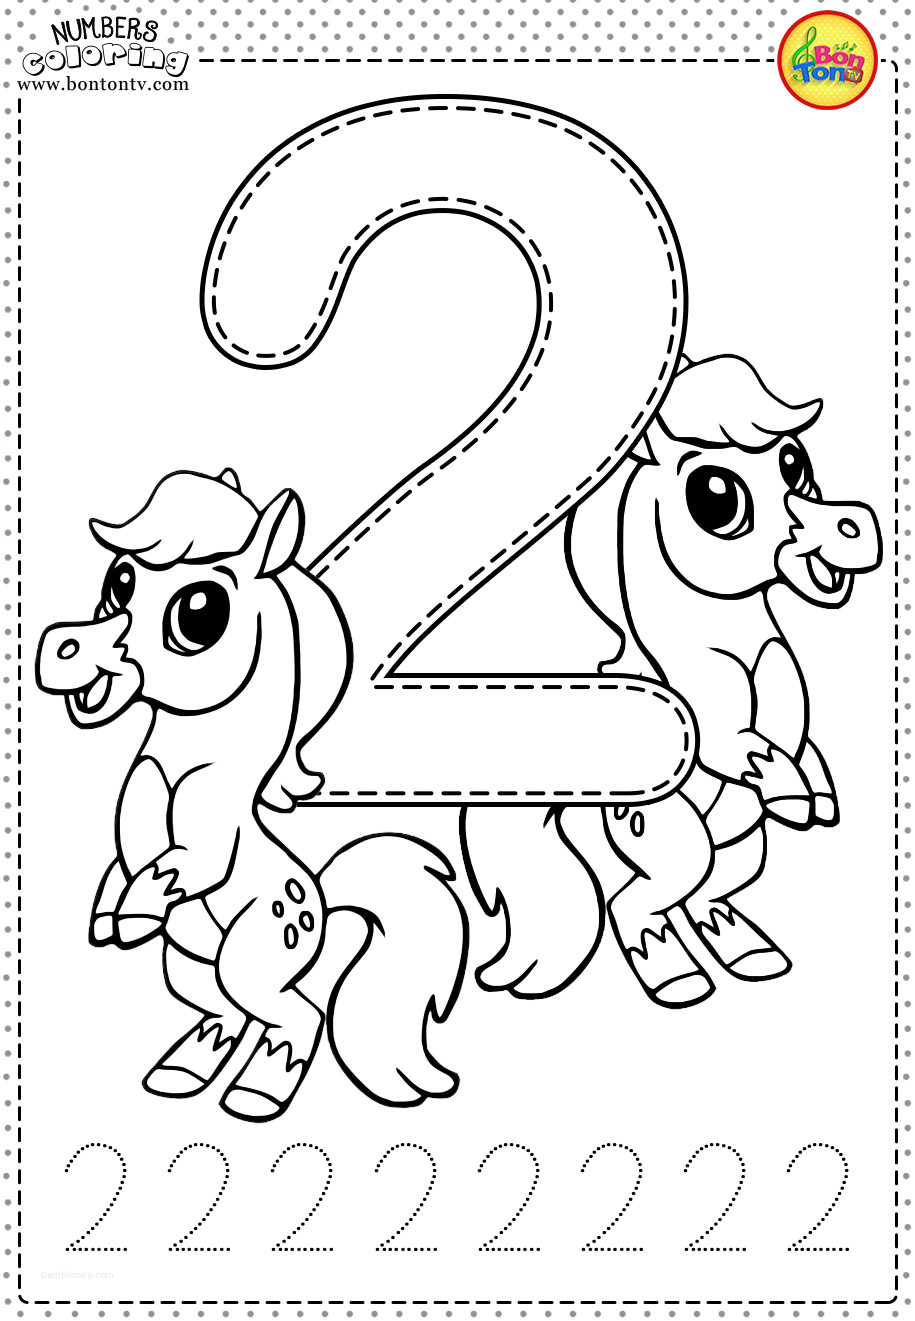 Preschool Color Book Printable Coloring Pages For Toddlers Fresh ...